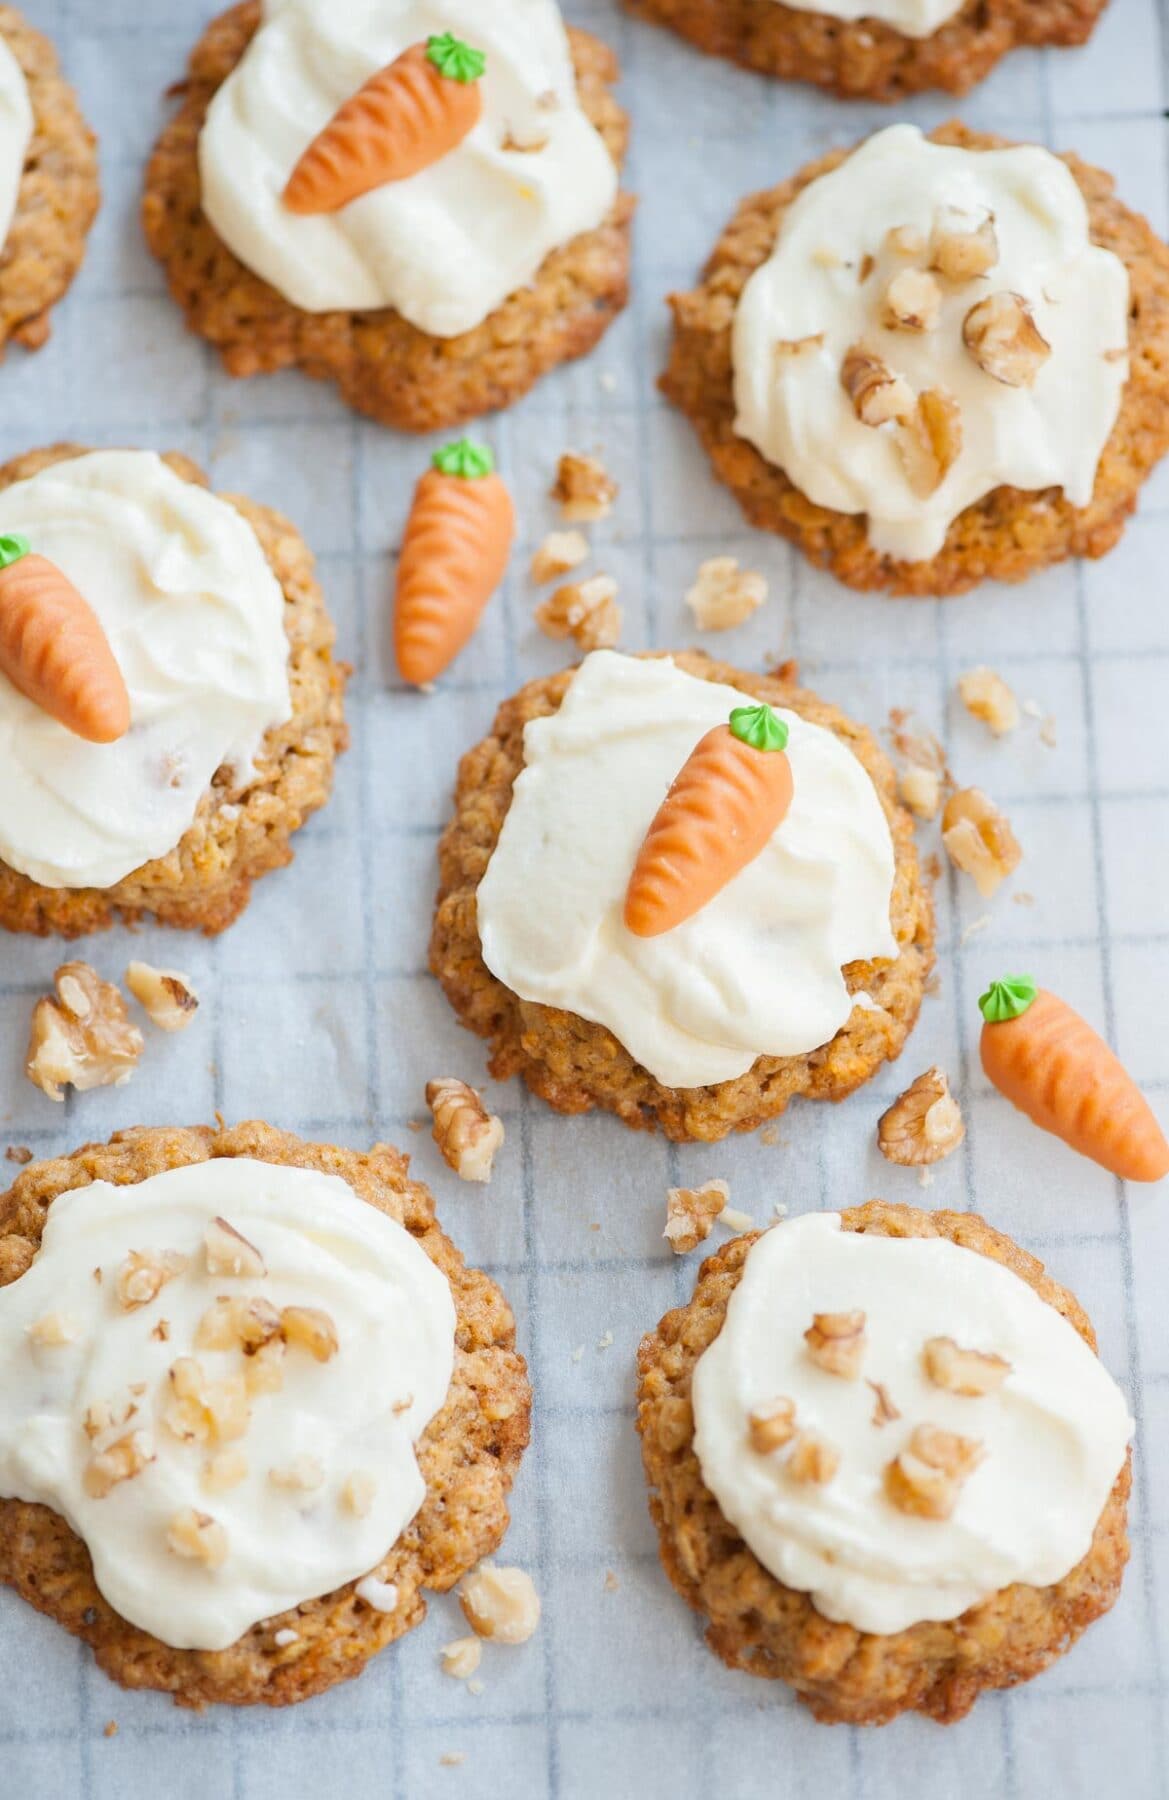 Carrot cake cookies with cream cheese frosting on a piece of parchment paper, topped with marzipan carrots and walnuts.